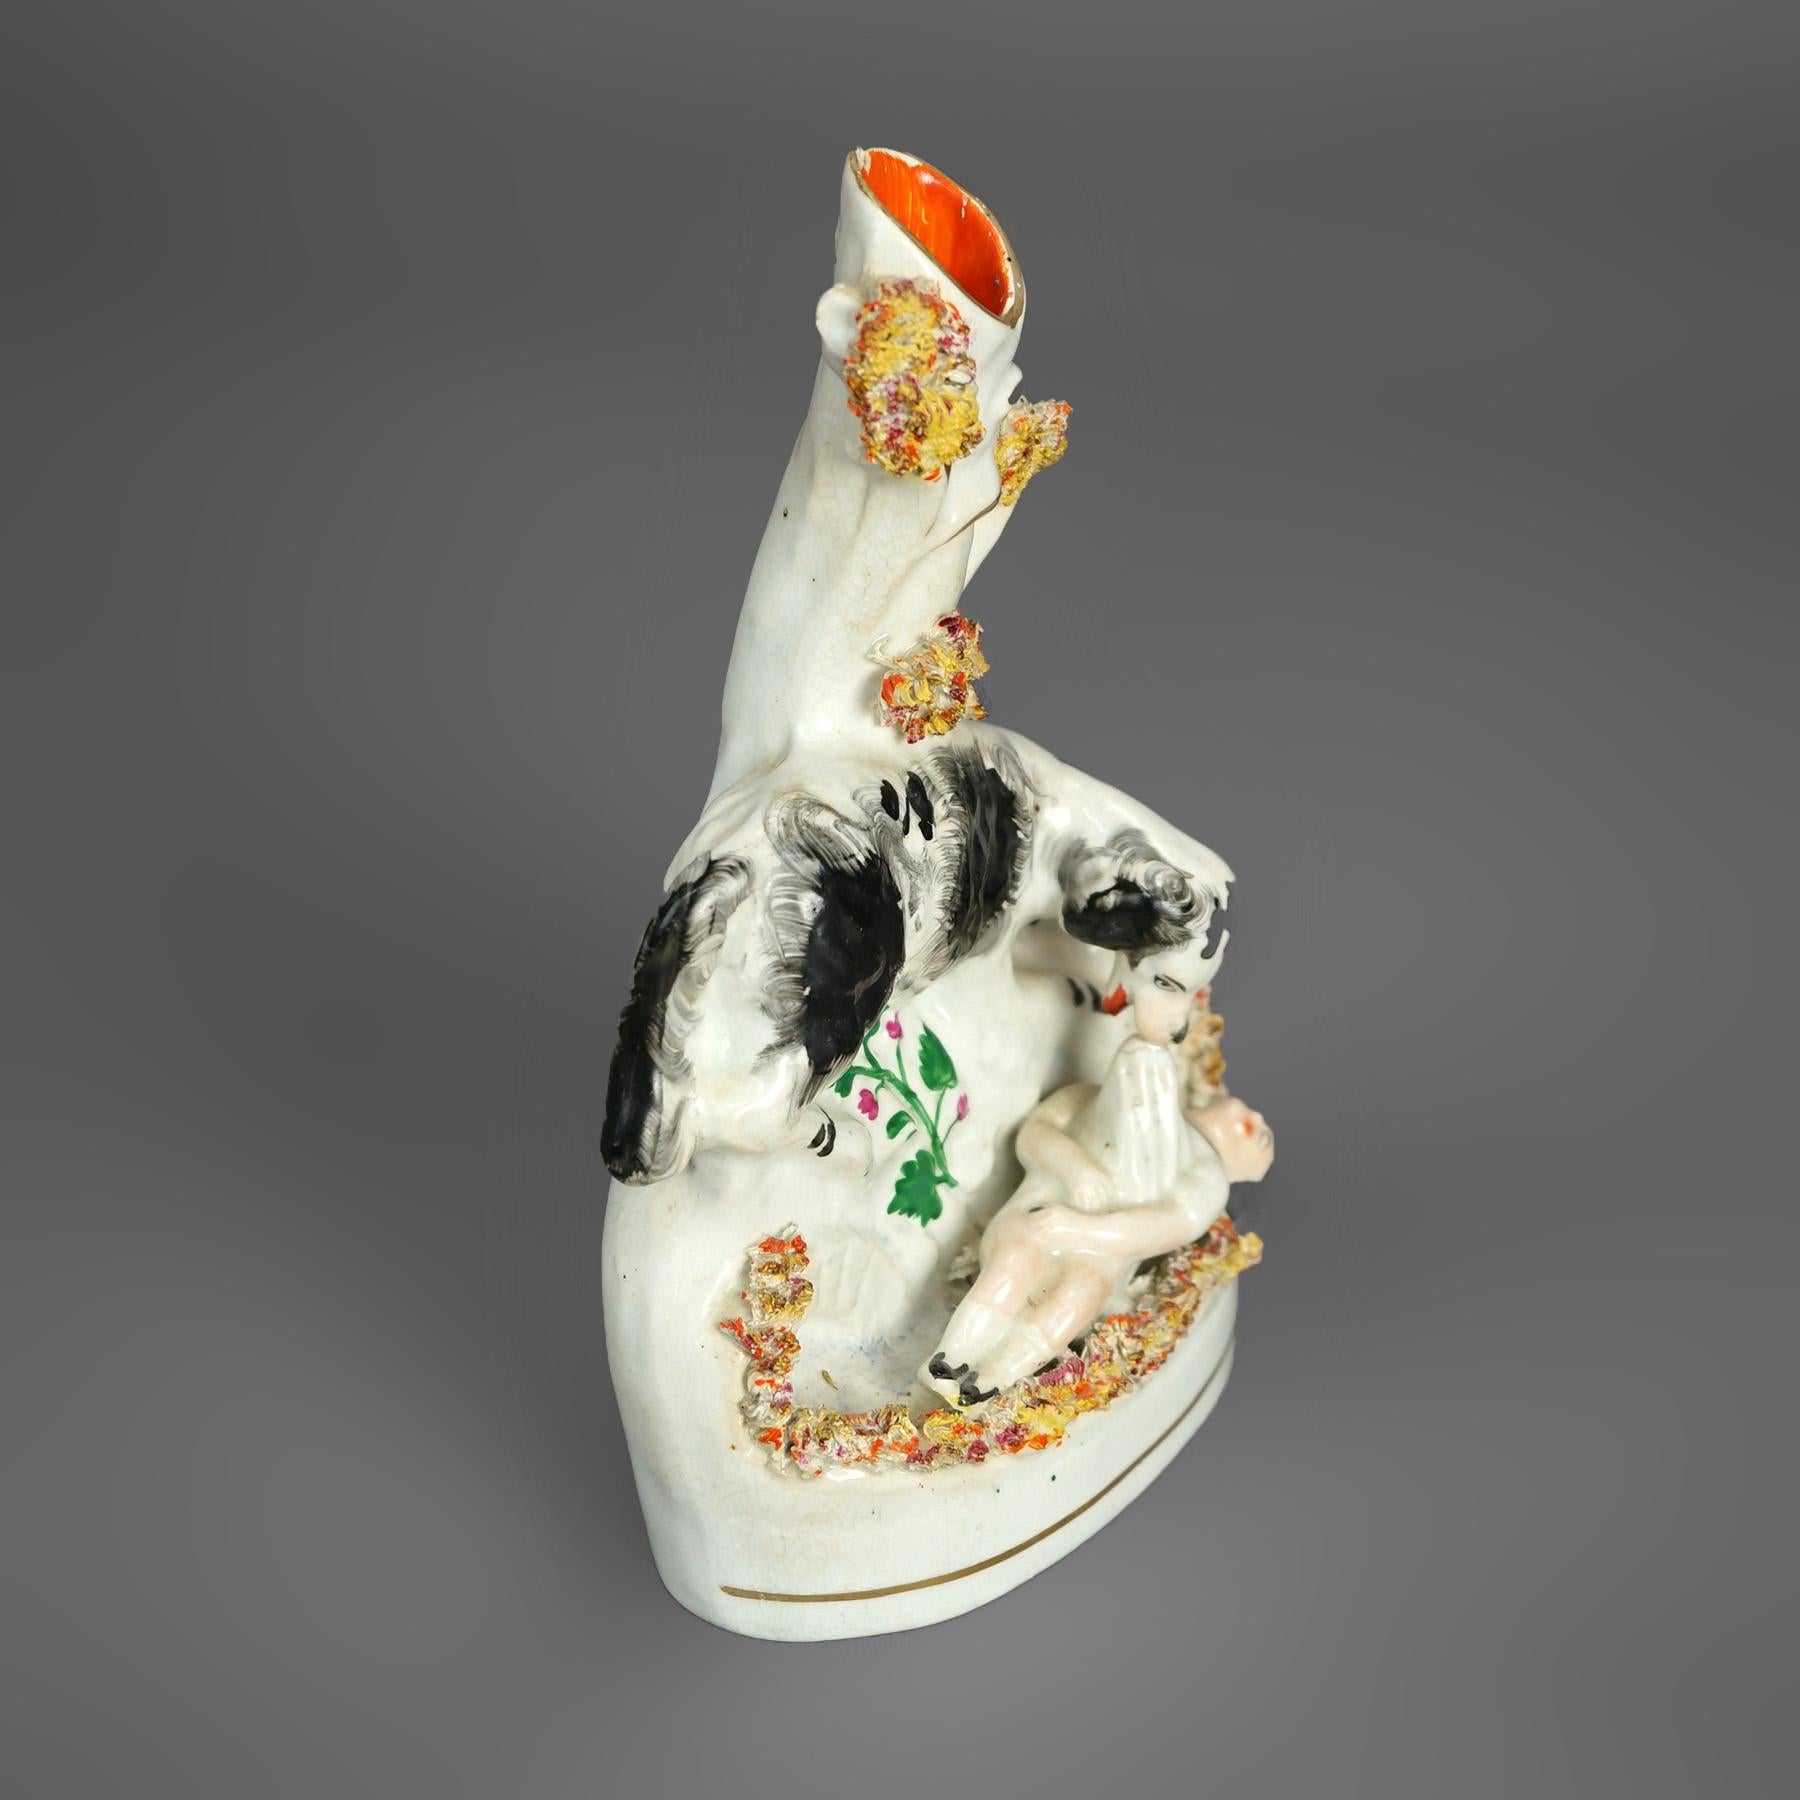 An antique pair of spill vases offer porcelain construction with hand painted and gilt figures of a playful child and Newfoundland (dog) in an outdoor setting, c1870

Measures- Right: 8''H x 5.25''W x 2.5''D; Left: 3''H x 5.25''W x 3''D